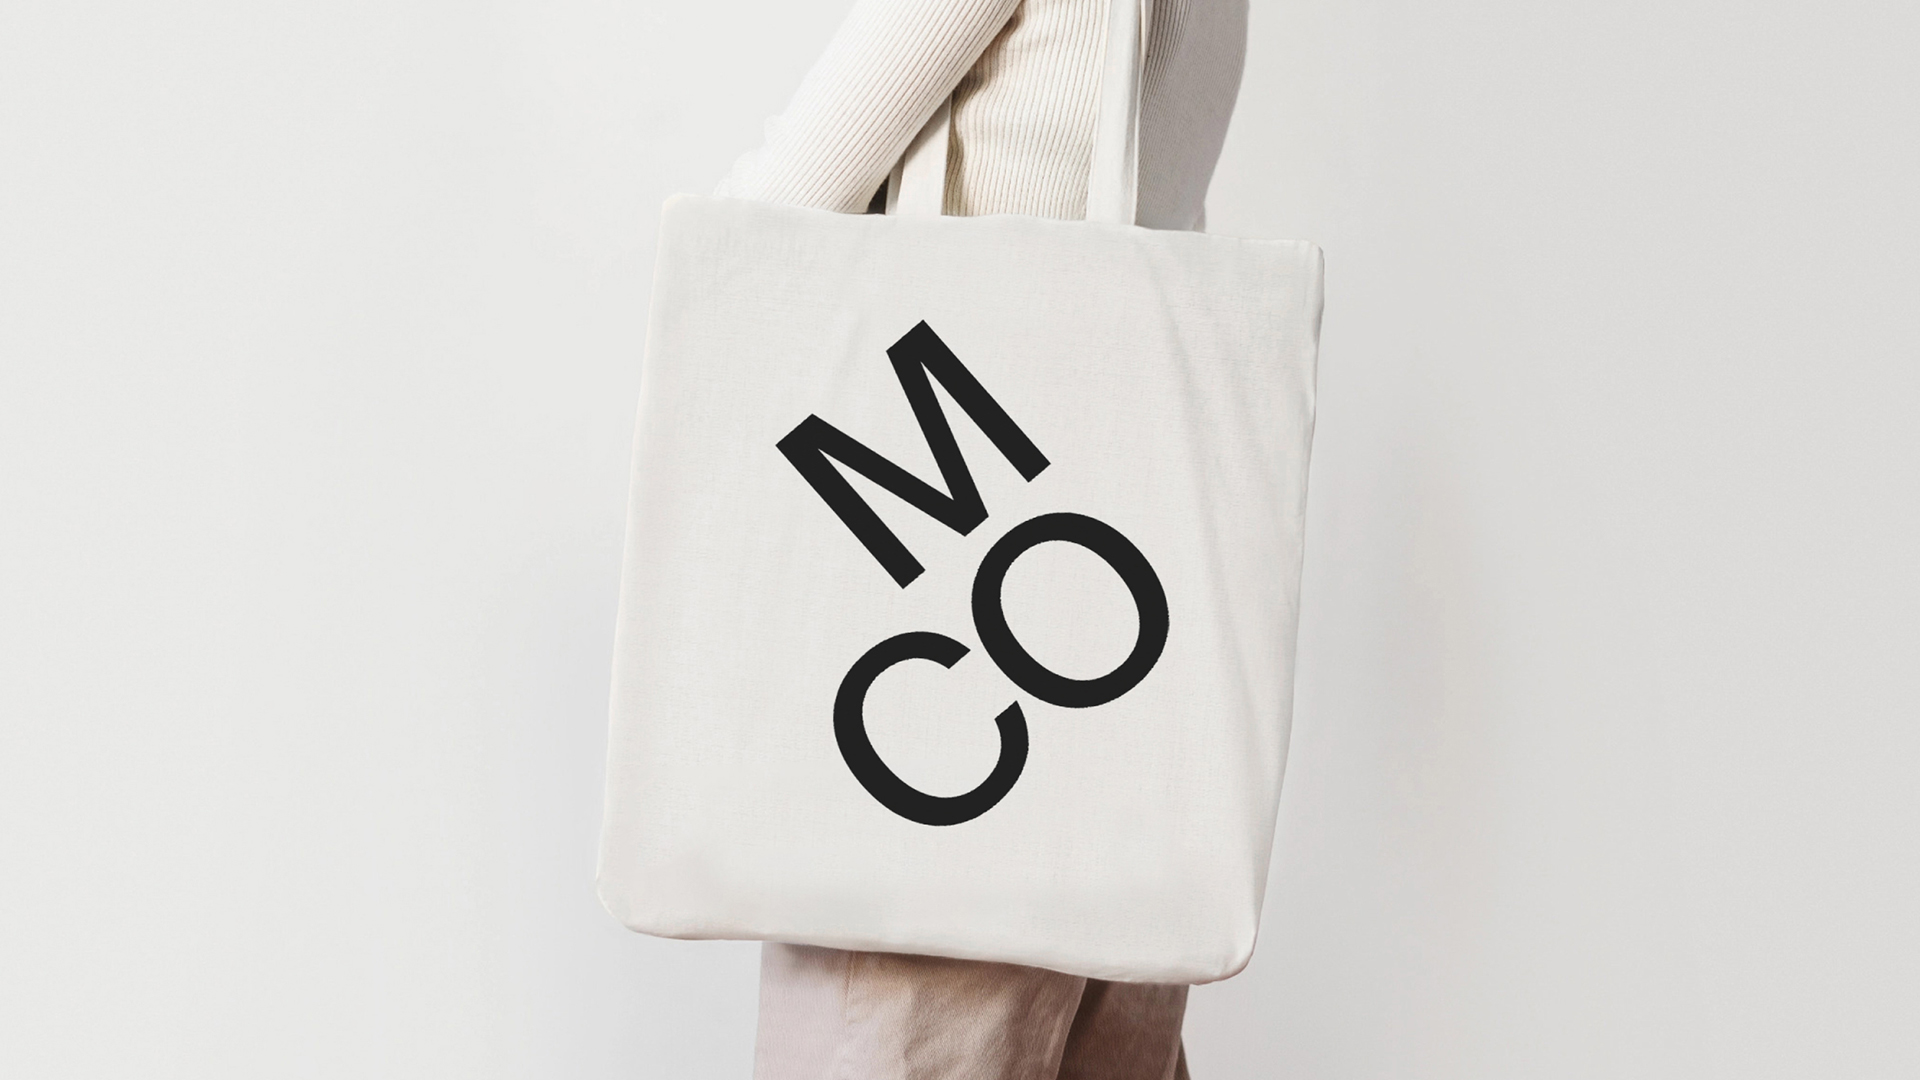 BA Graphic Communication identity by Chrysangelos Kougioutas for Museum of Communication. A model photographed from the shoulder down, dressed in neutral coloured clothing, with a tote bag over their shoulder. On the tote, the letters MOC are printed forming a right angle shape, in black sans serif typography.